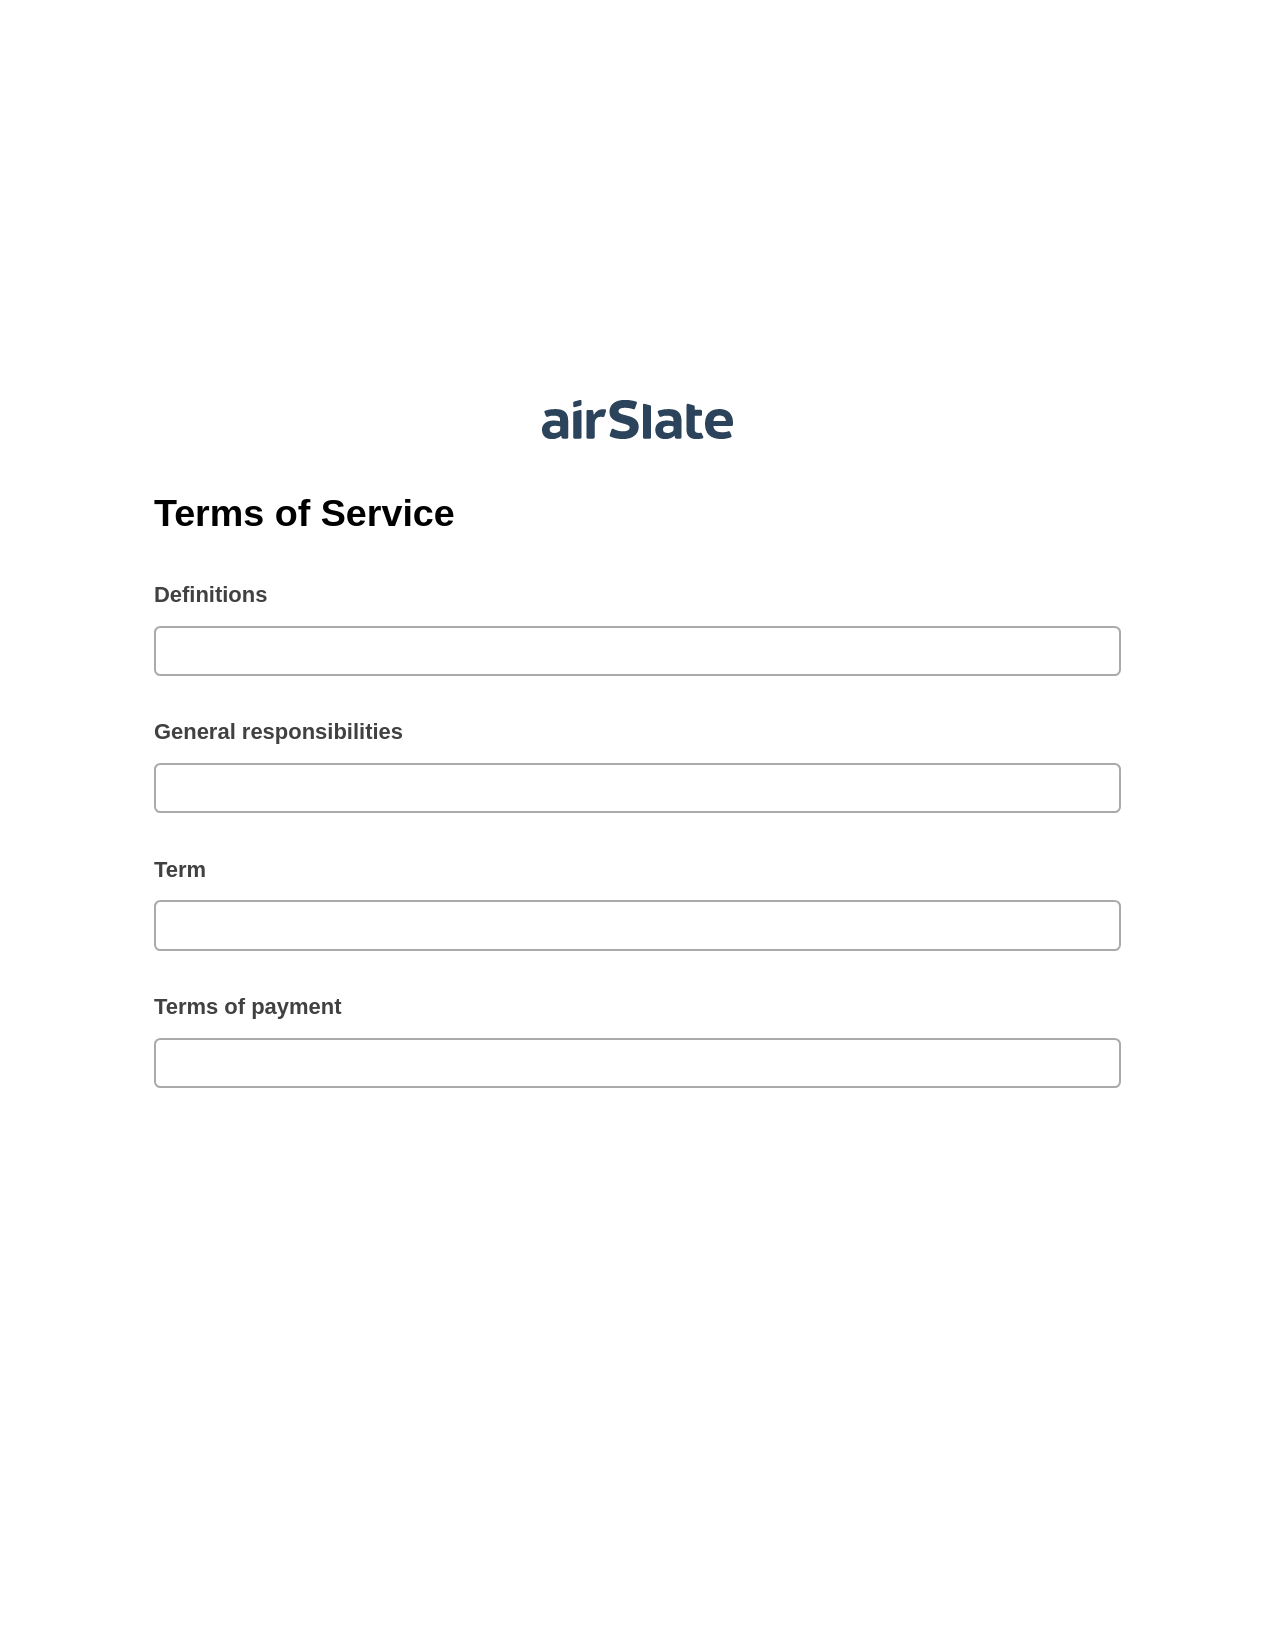 Multirole Terms of Service Pre-fill from Salesforce Record Bot, Remove Slate Bot, Export to Formstack Documents Bot